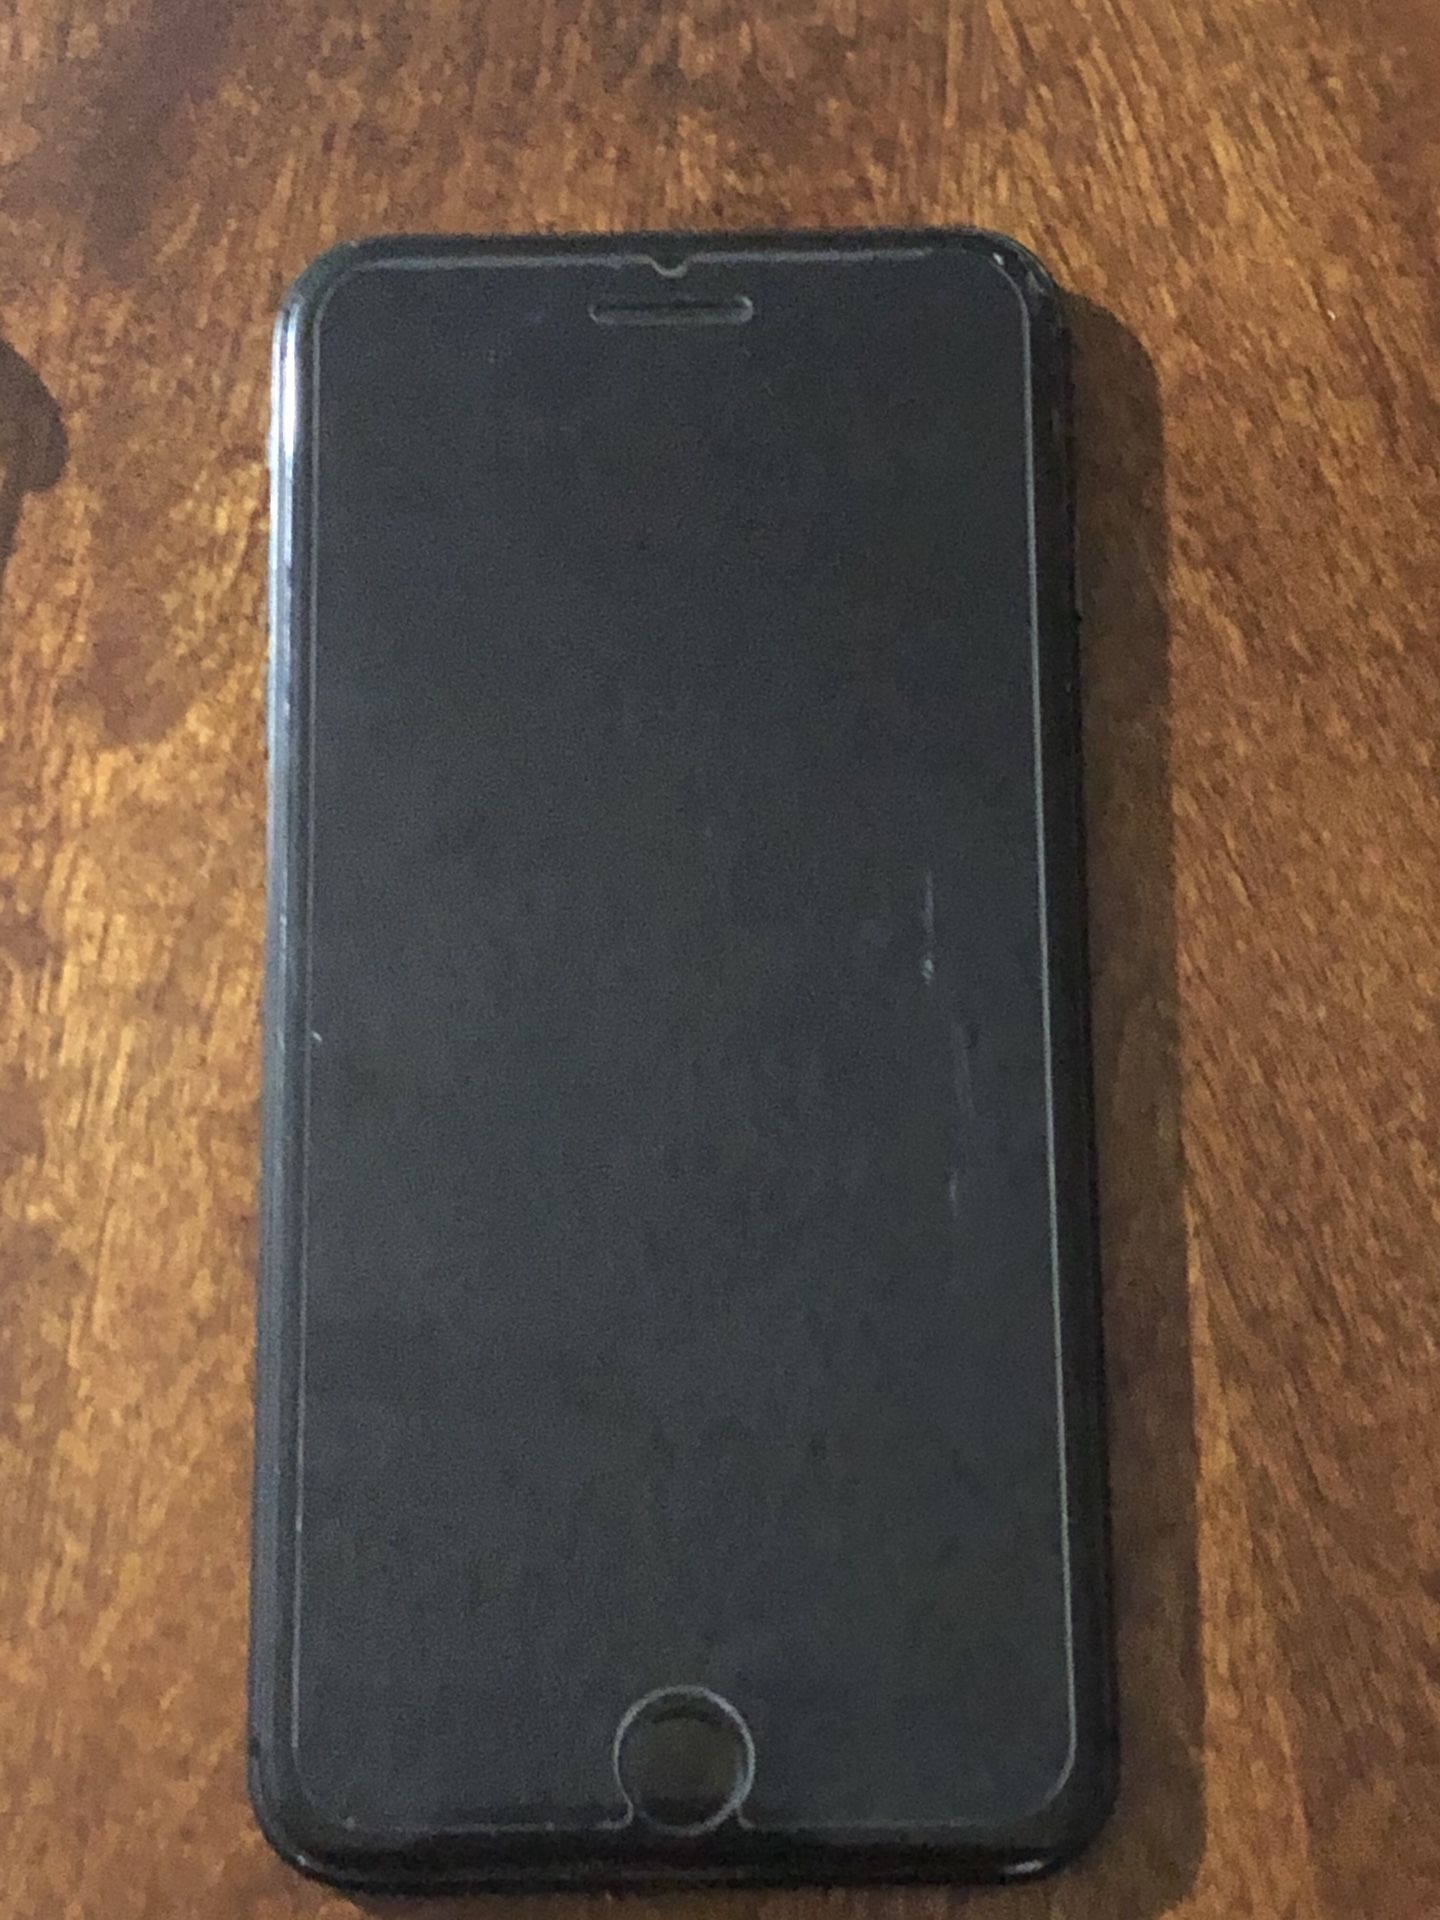 iPhone 8 Plus for parts with clear case price negotiable